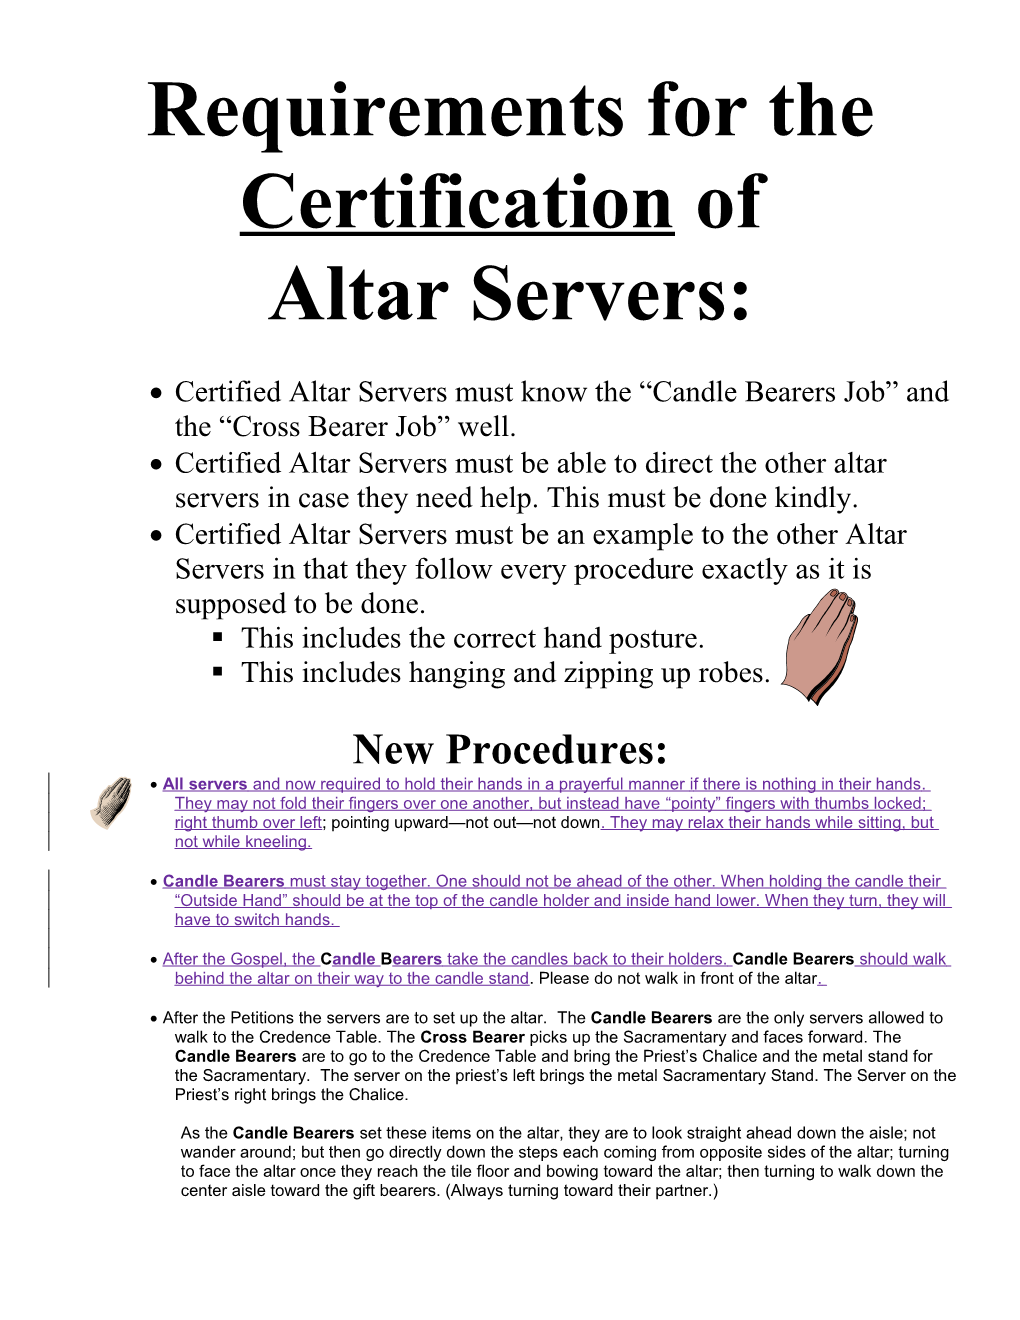 Requirements to Be a Certified Altar Server